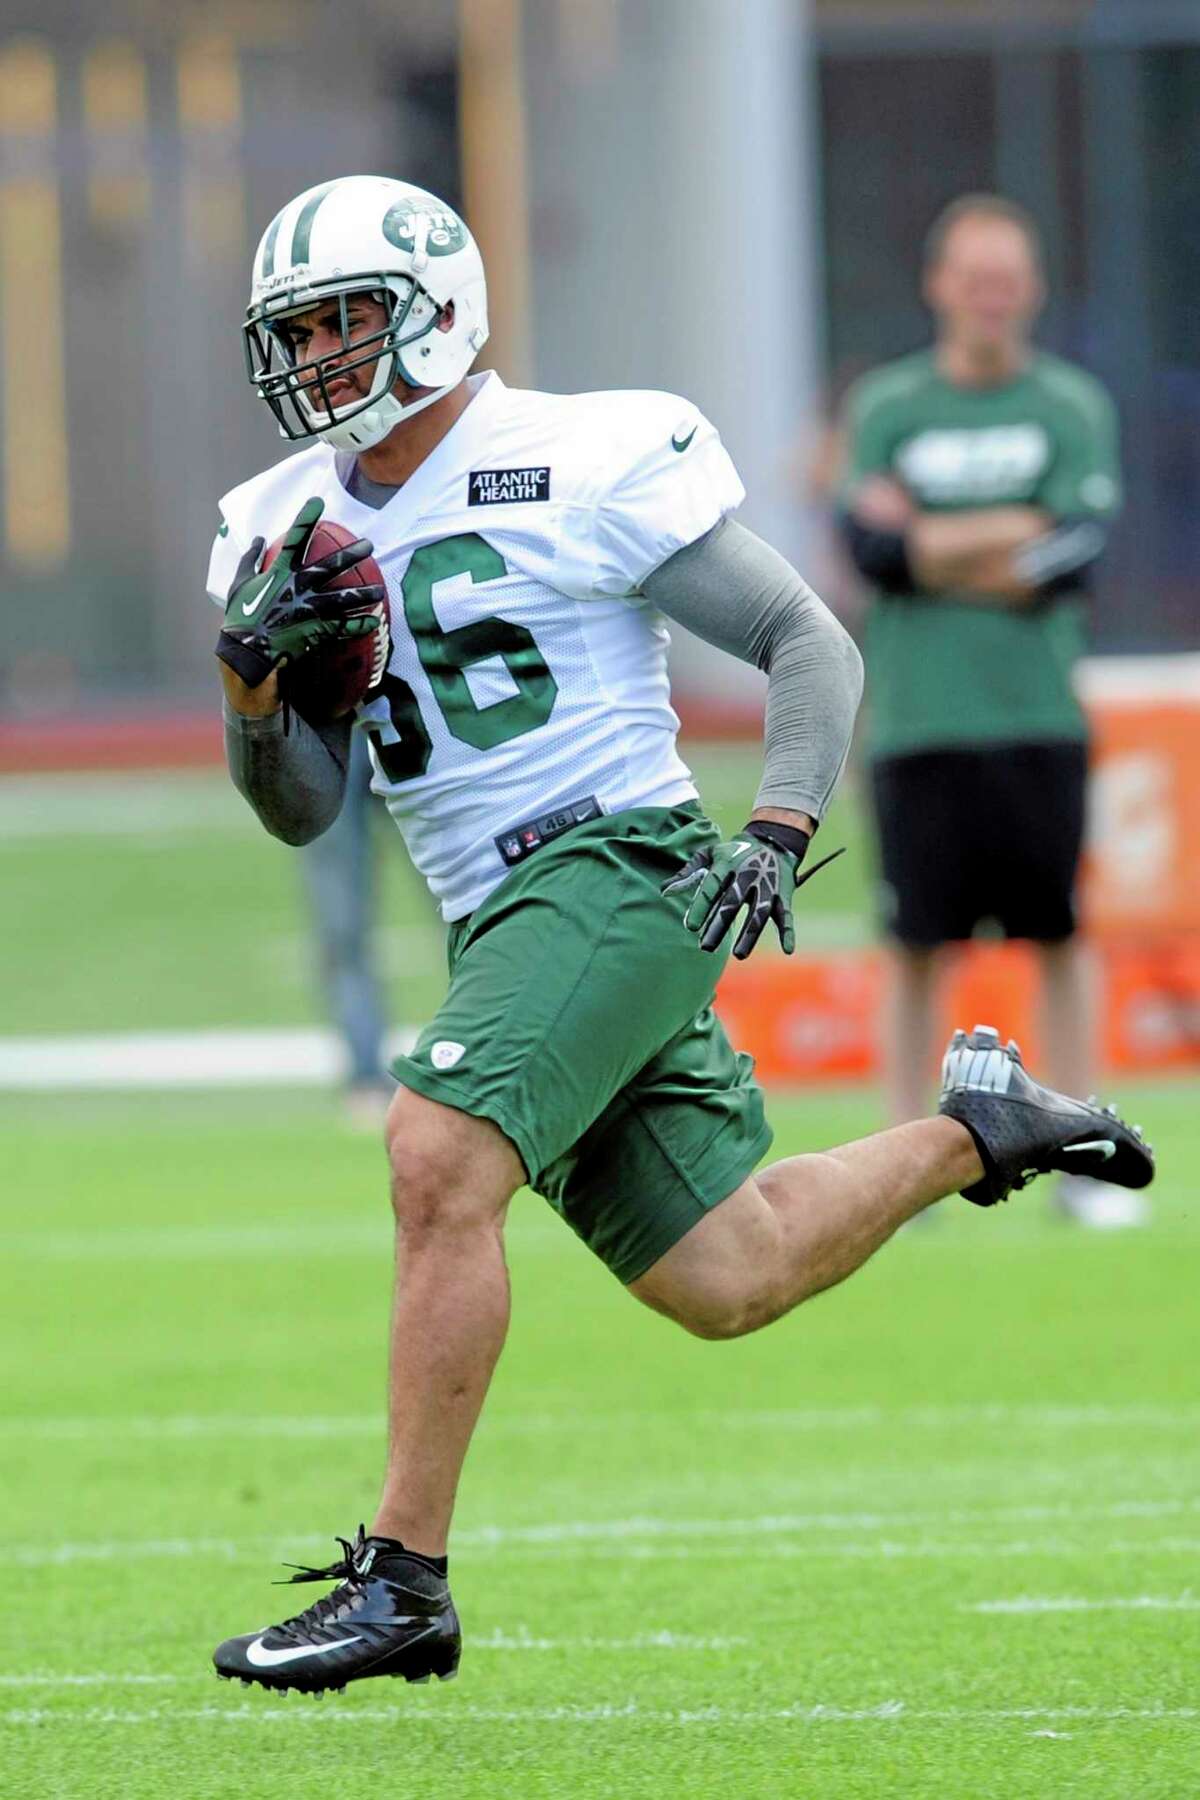 FILE - In this June 11, 2013, file photo, New York Jets fullback Lex Hilliard runs with the ball during NFL football minicamp in Florham Park, N.J. A person familiar with the injury says Hilliard will miss the entire season with a broken shoulder blade that requires surgery. He was injured during practice on Tuesday, Aug. 20, 2013, when he went down after a running play. The person spoke to The Associated Press on condition of anonymity because the team had not announced the severity of Hilliard's injury. (AP Photo/Bill Kostroun, File)